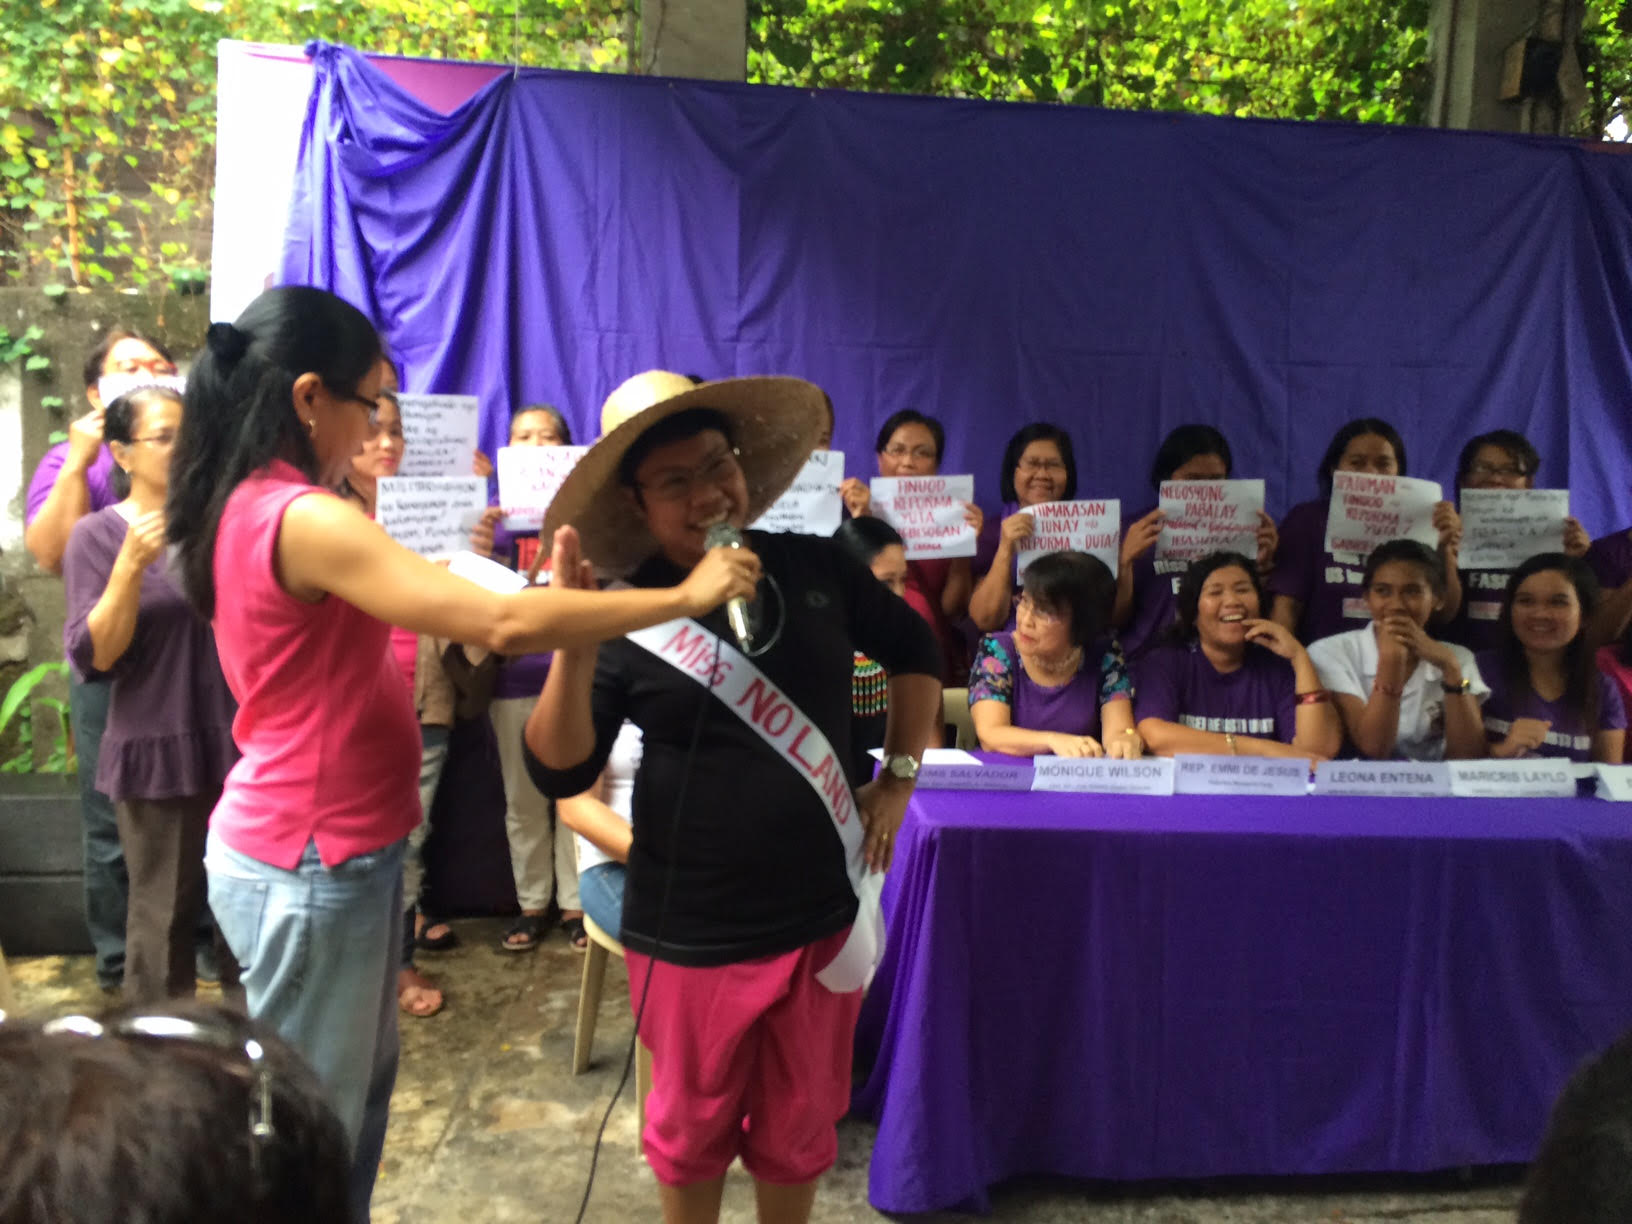 Members of the Gabriela Alliance of Women and other women's groups stage a spoof of the Miss Universe beauty pageant, calling their mock contest Miss Neo-libers, a swipe at neo-liberal economic policies that have abandoned the poor.  They also slammed the Miss Universe pageant as something that Western capitalists profit from but does not empower women as it claims. (PHOTO BY JODEE AGONCILLO / INQUIRER)